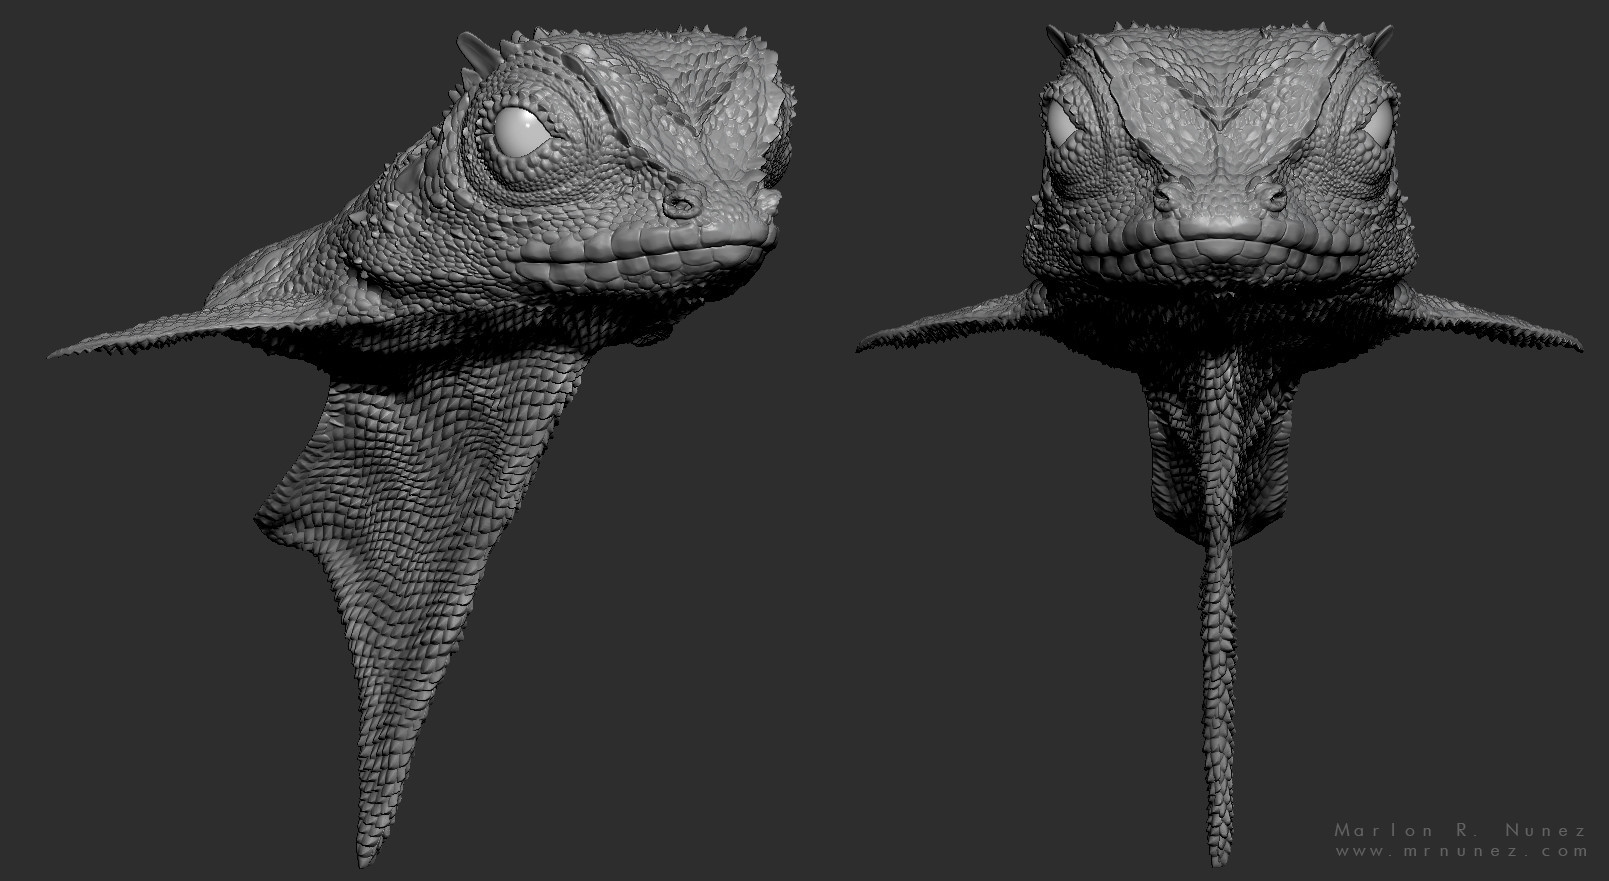 scale is weird in zbrush when importing